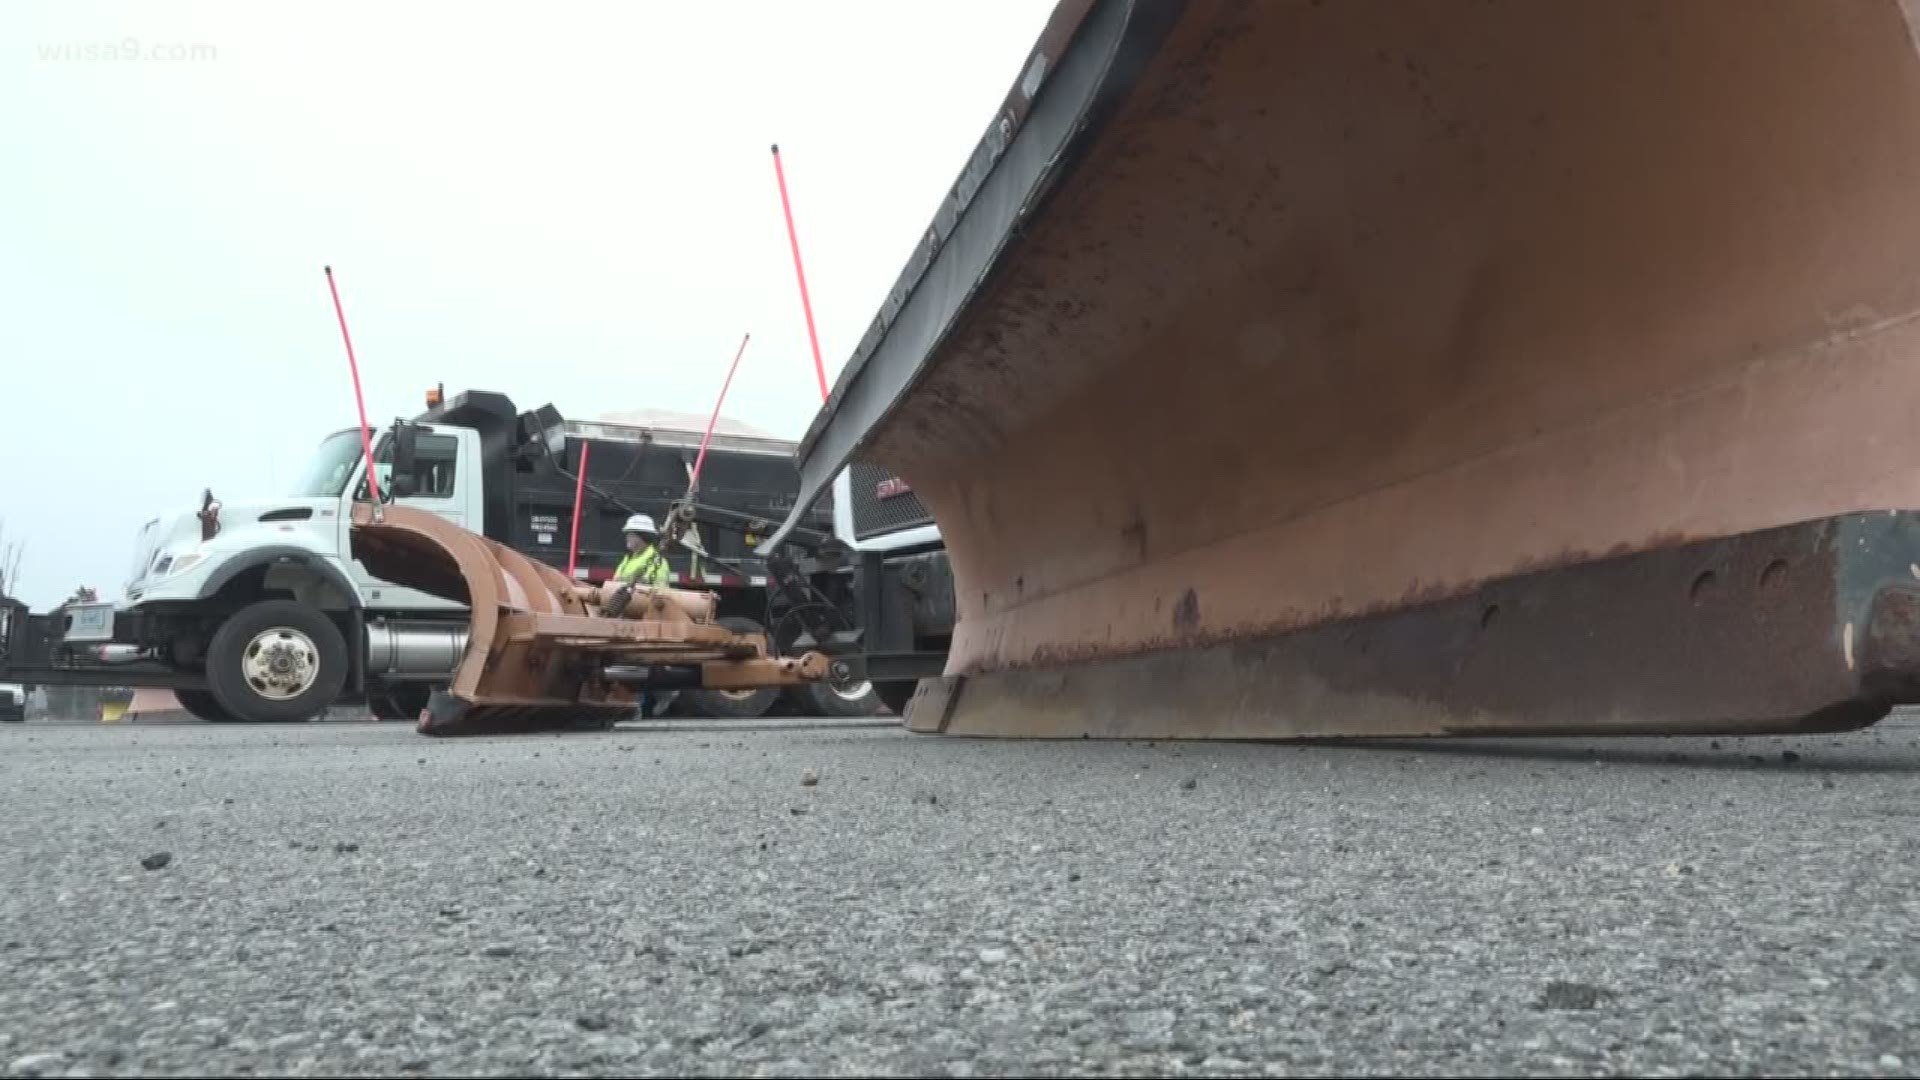 Around 3,800 VDOT crews and contractors will hit the streets of Northern Virginia on Saturday in preparation for the storm.